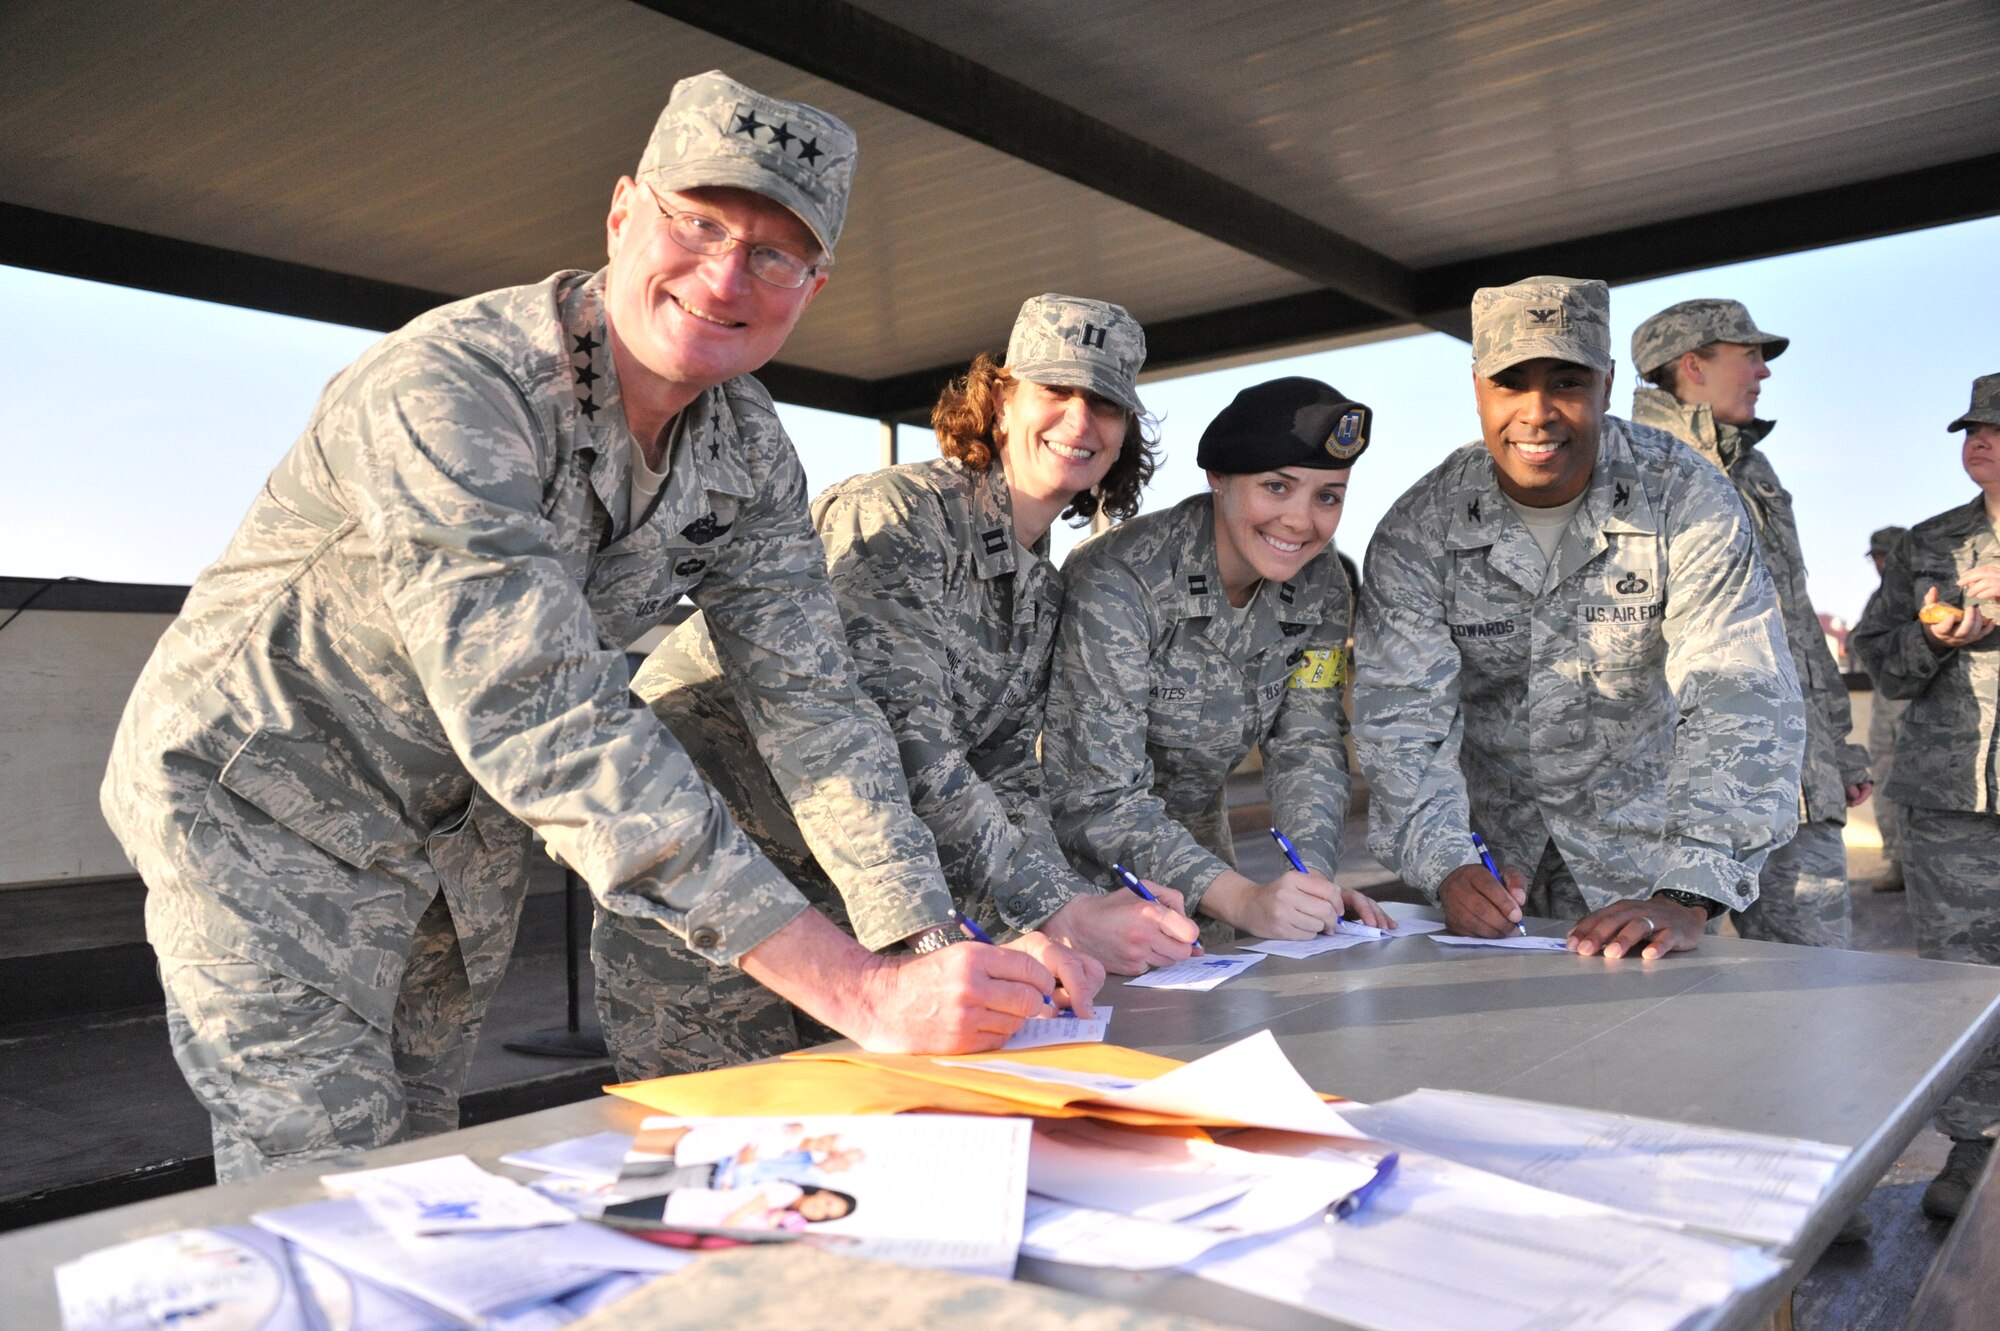 Lieutenant Gen. David Fadok, left, commander and president of the Air University, and Col. Trent Edwards, right, 42nd Air Base Wing commander, complete their 2013 Air Force Assistance Fund donation forms with Captains Neysa Etienne and Cassandra Bates, 2013 AFAF project officers, during the kickoff rally March 29. (U.S. Air Force photo by Staff Sgt. Sandra Percival)